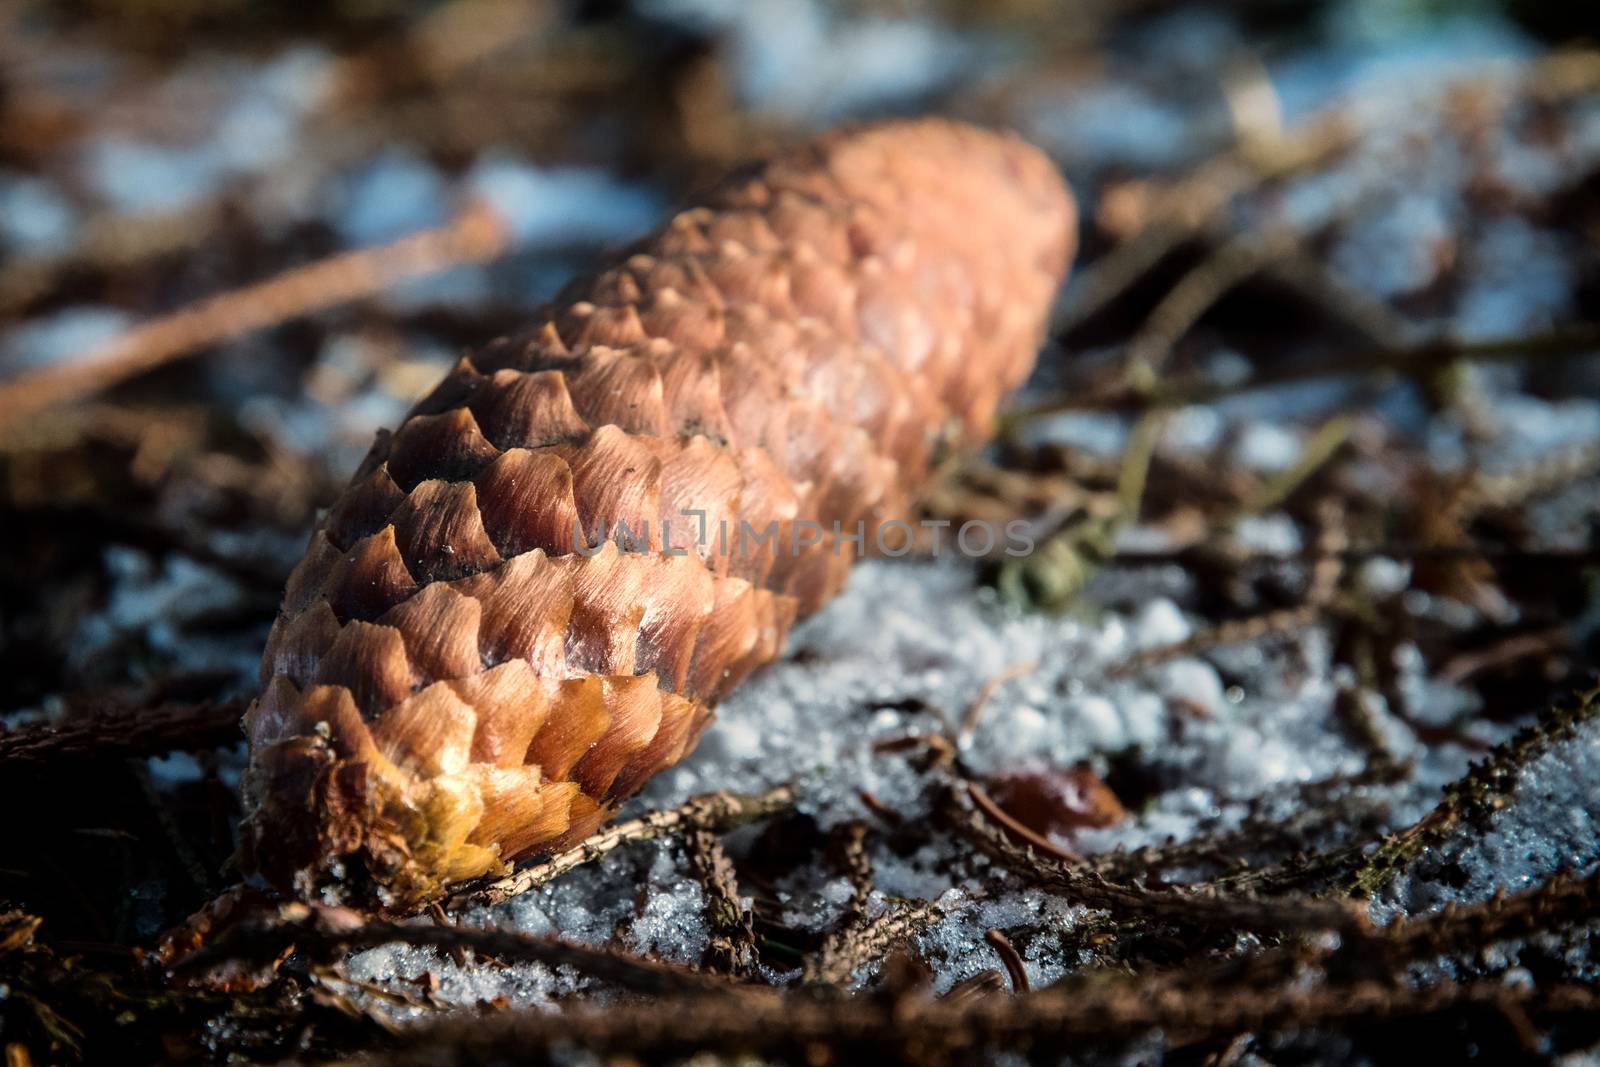 Image of a fir cone on the soil of a forest by w20er